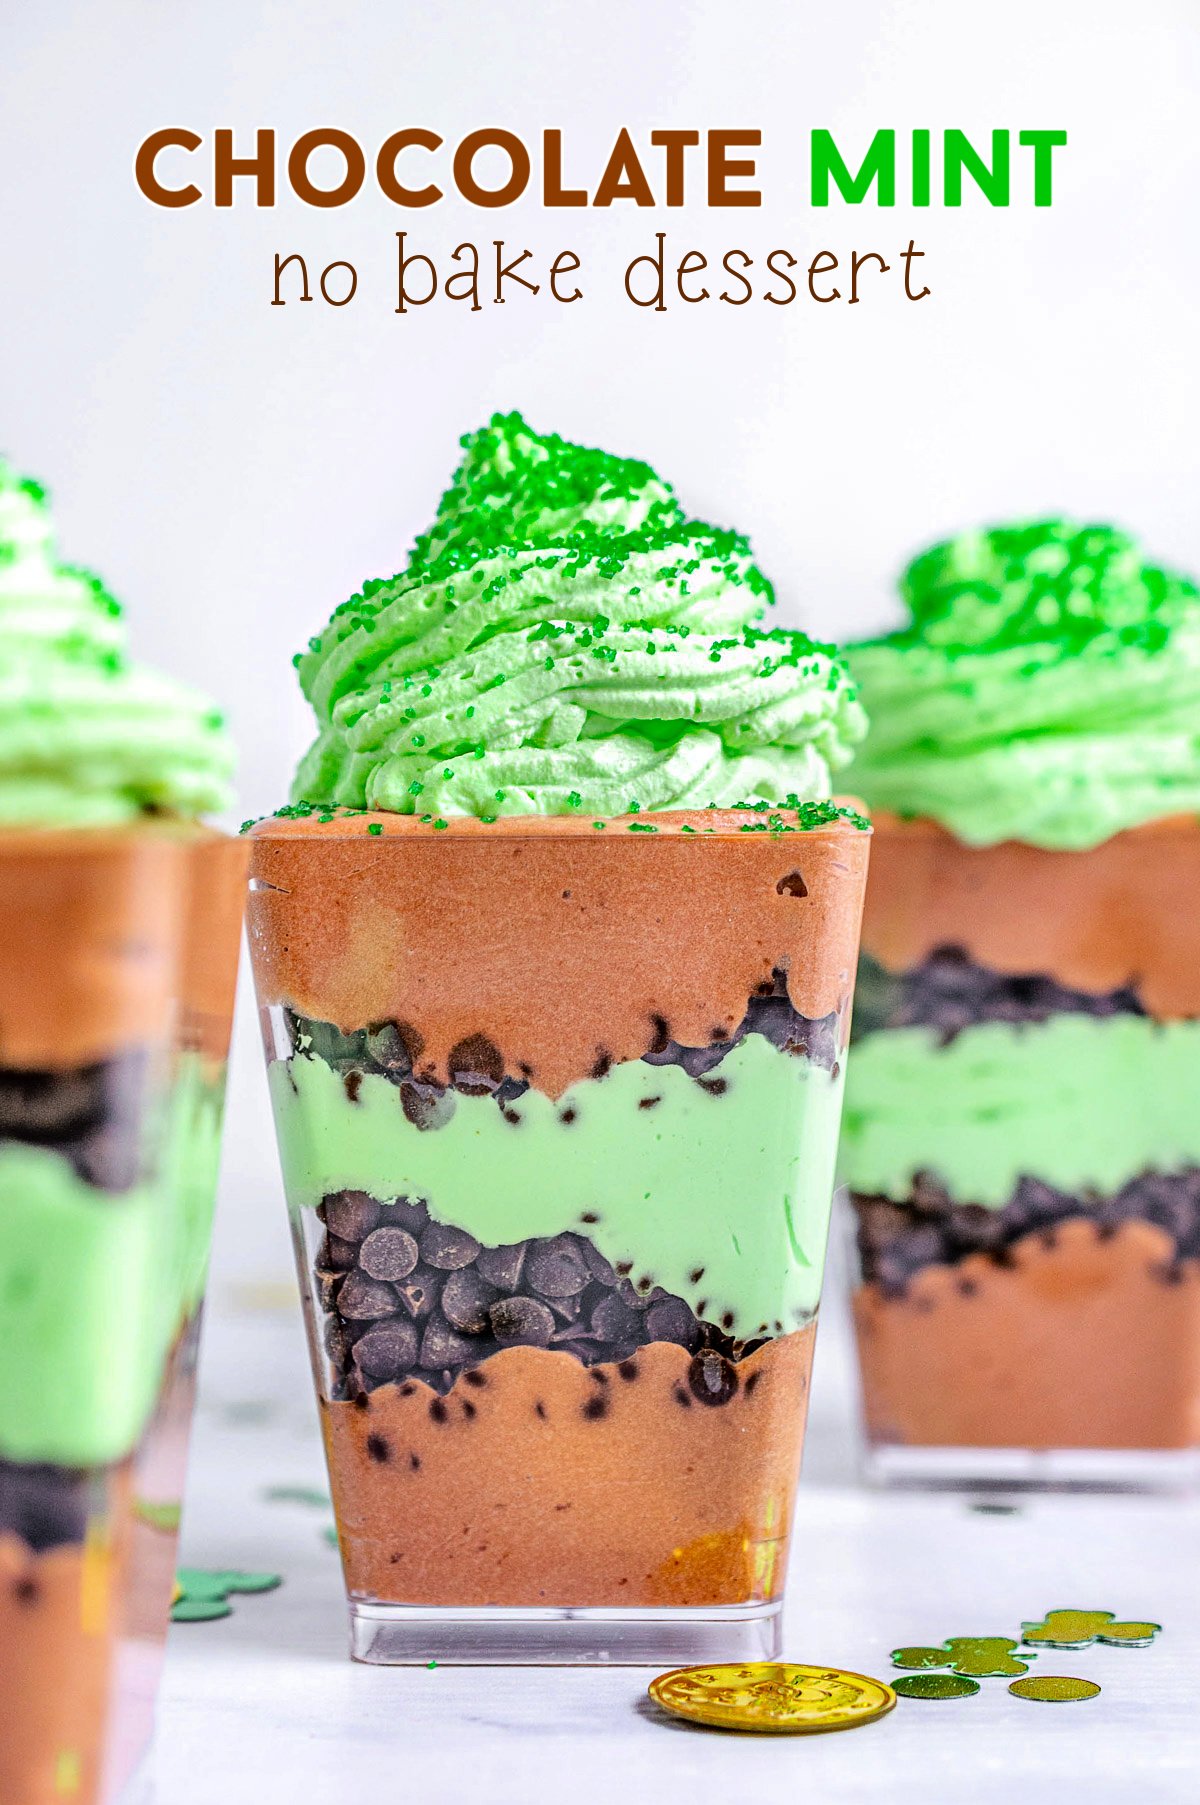 chocolate mint layered dessert in small square plastic cups with title overlay at top of image.